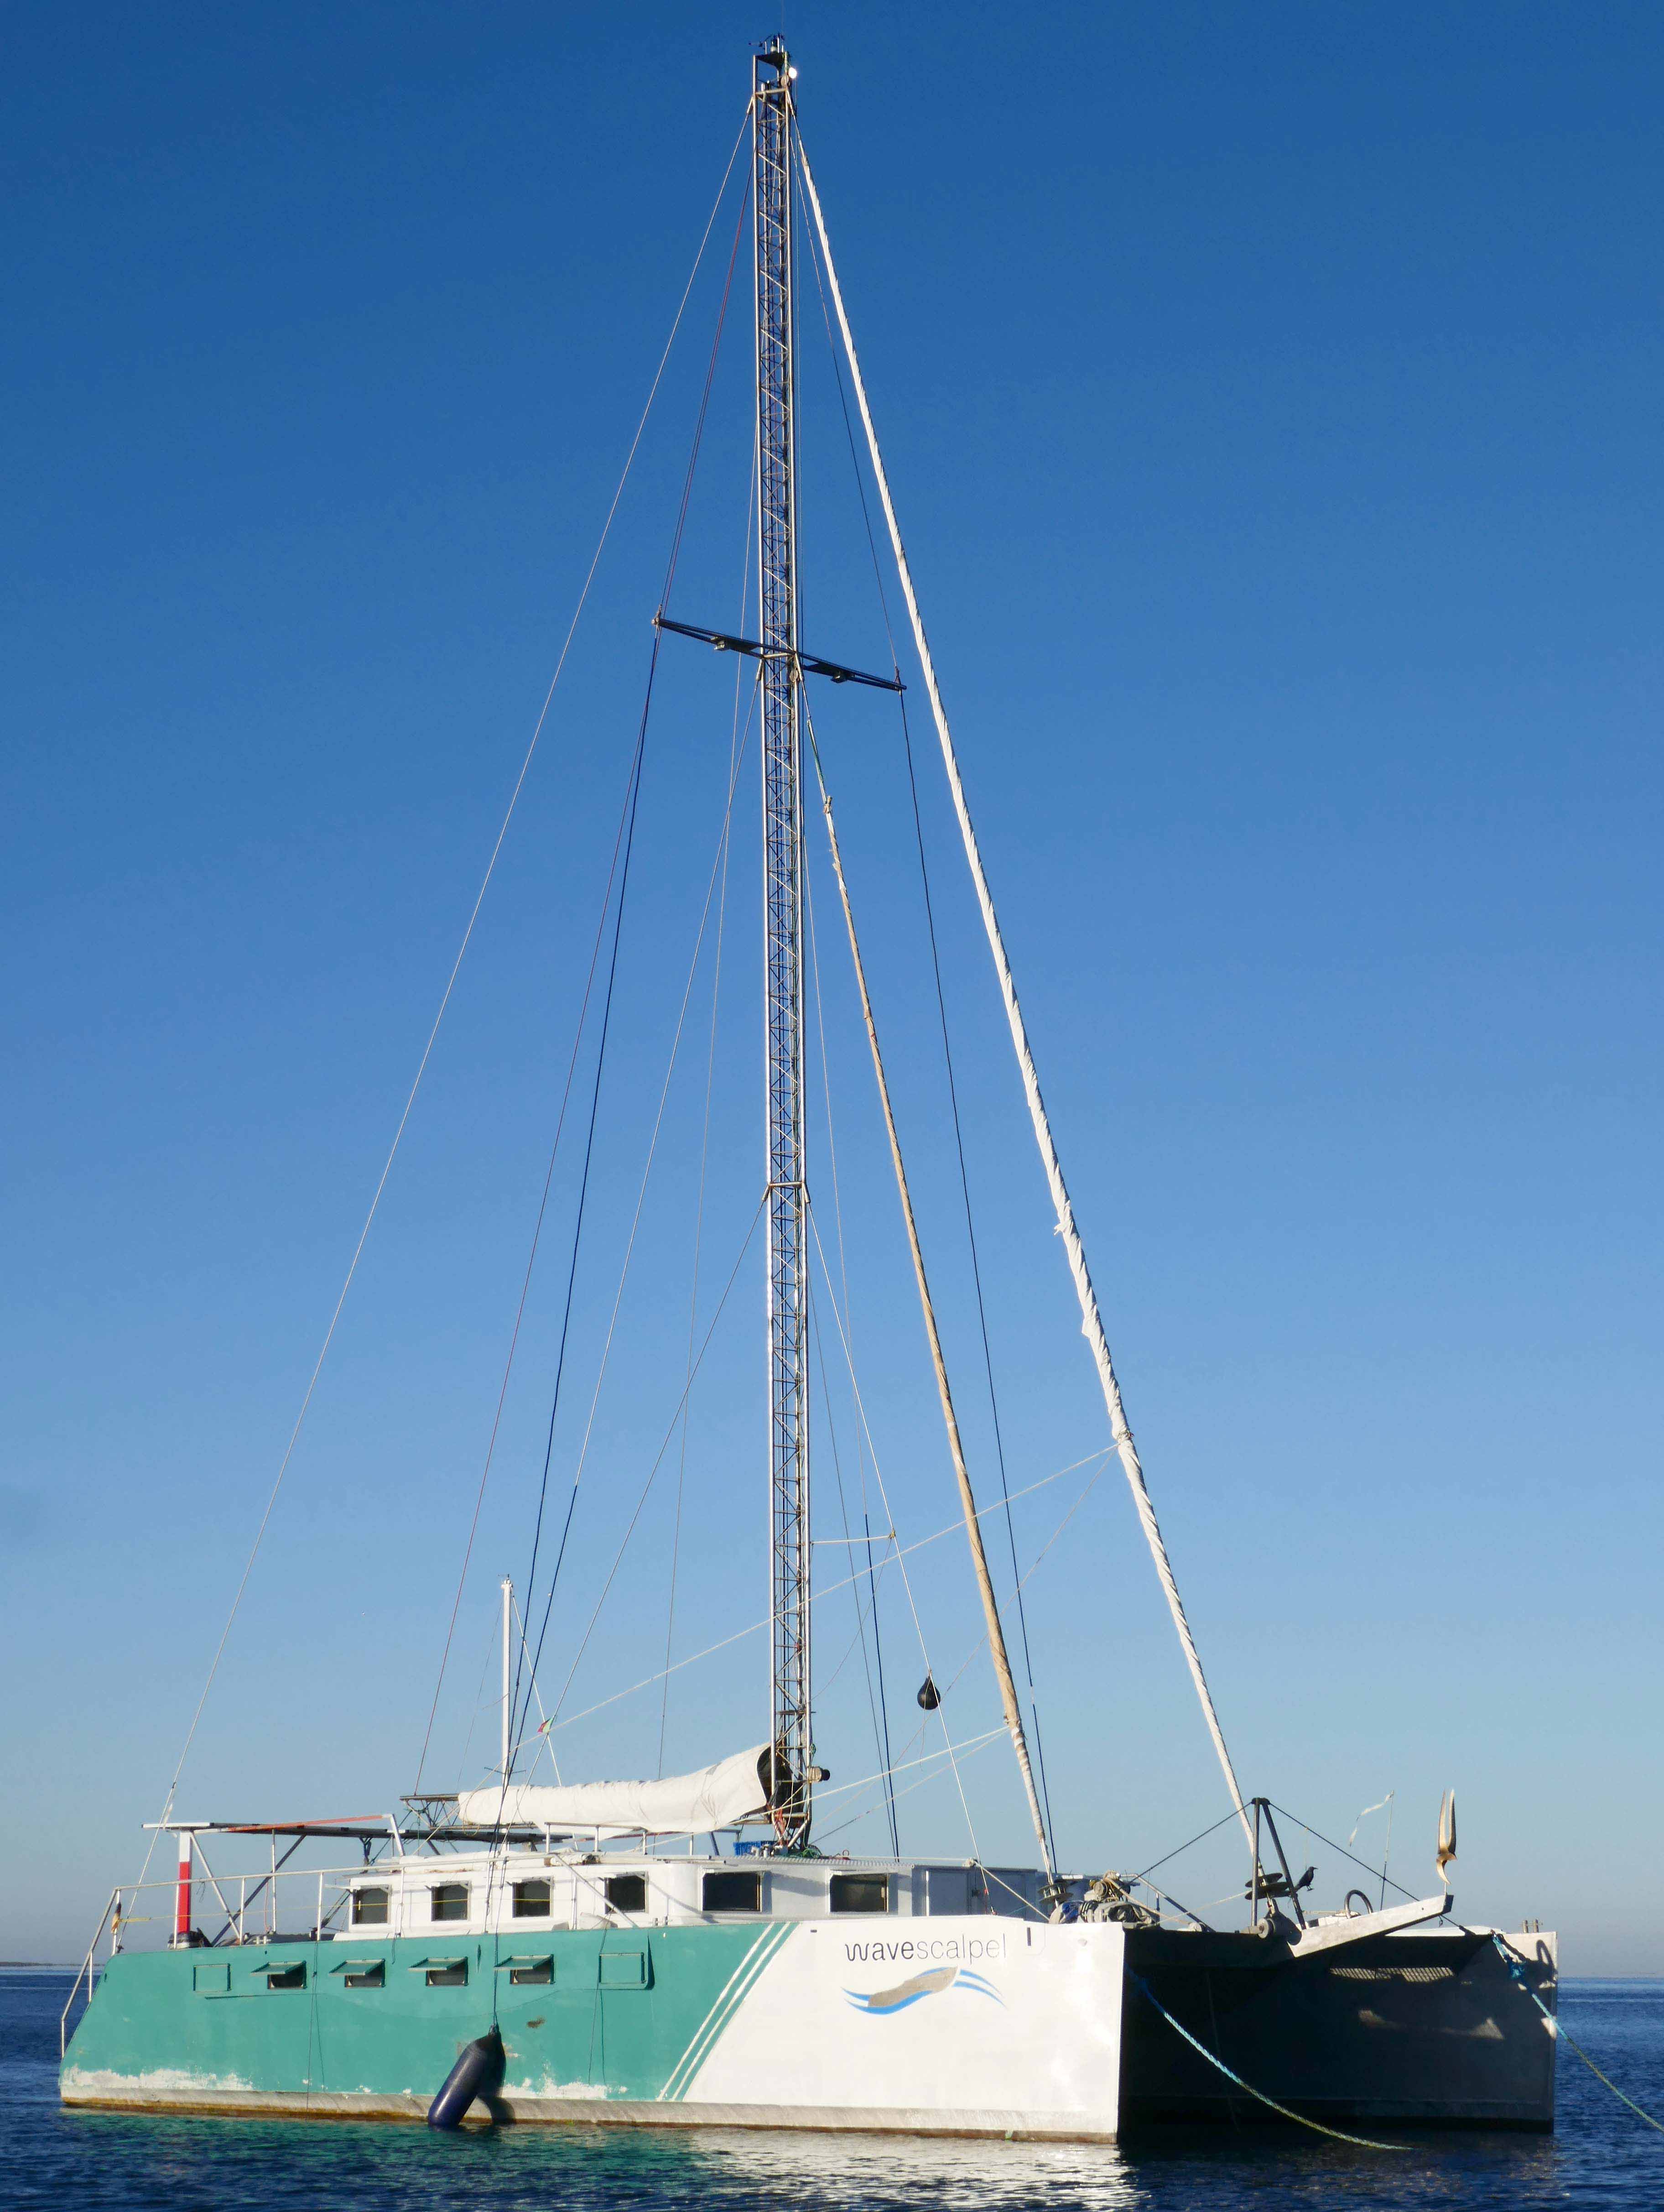 2012 Other WaveScalpel 57' Sailboat for sale in Portugal - image 1 